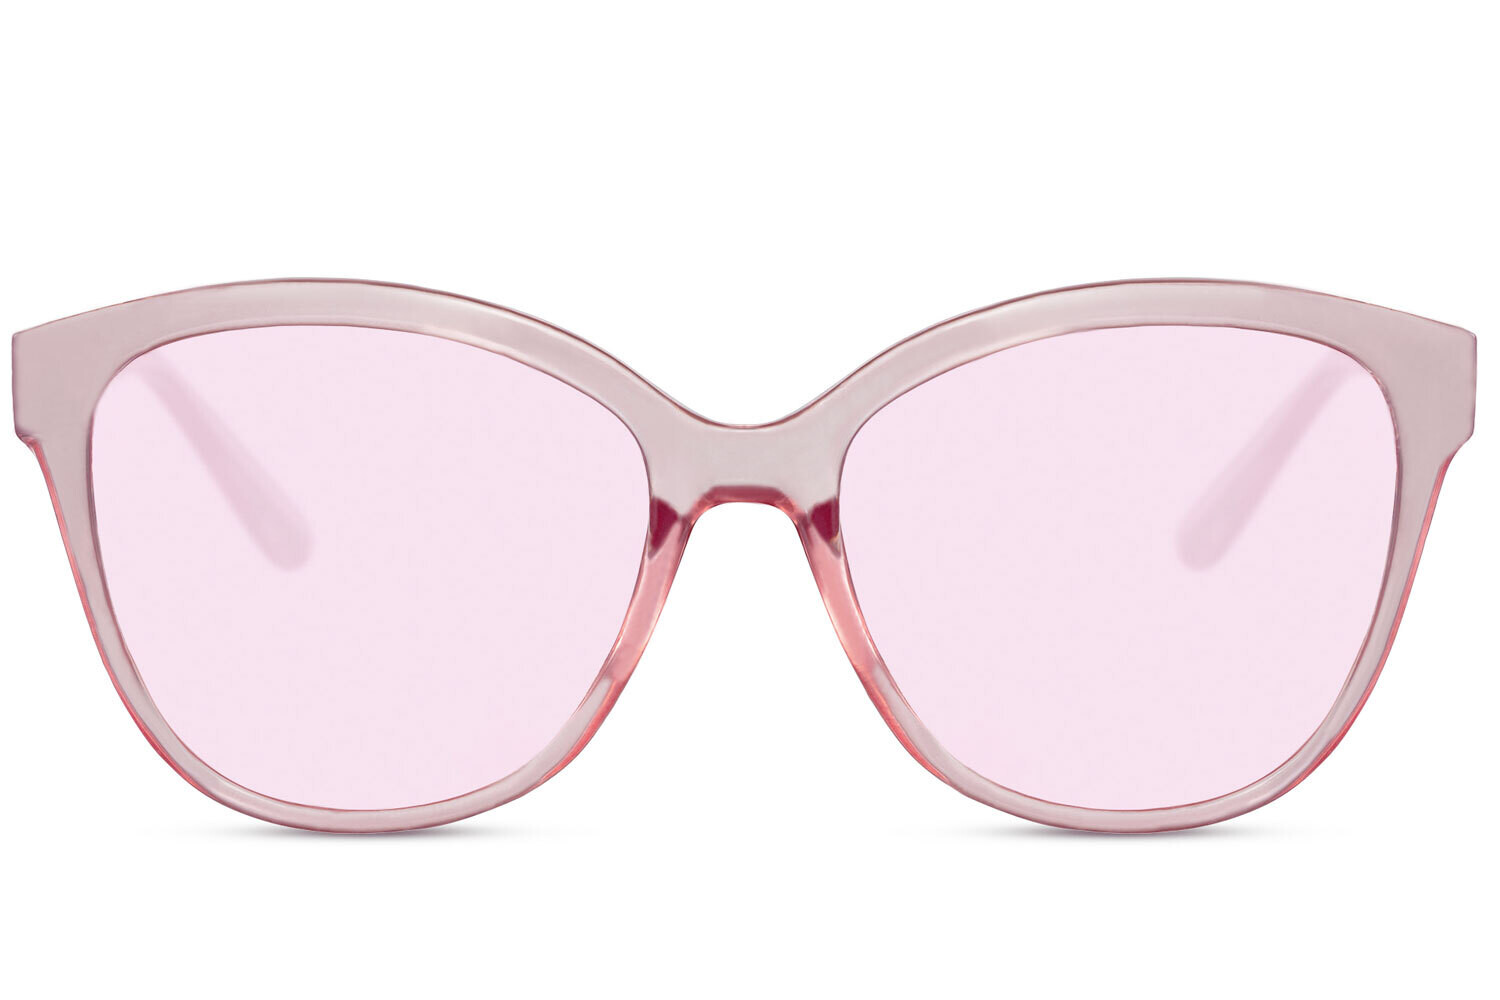 Women's Pale Pink Recycled Plastic Sunglasses